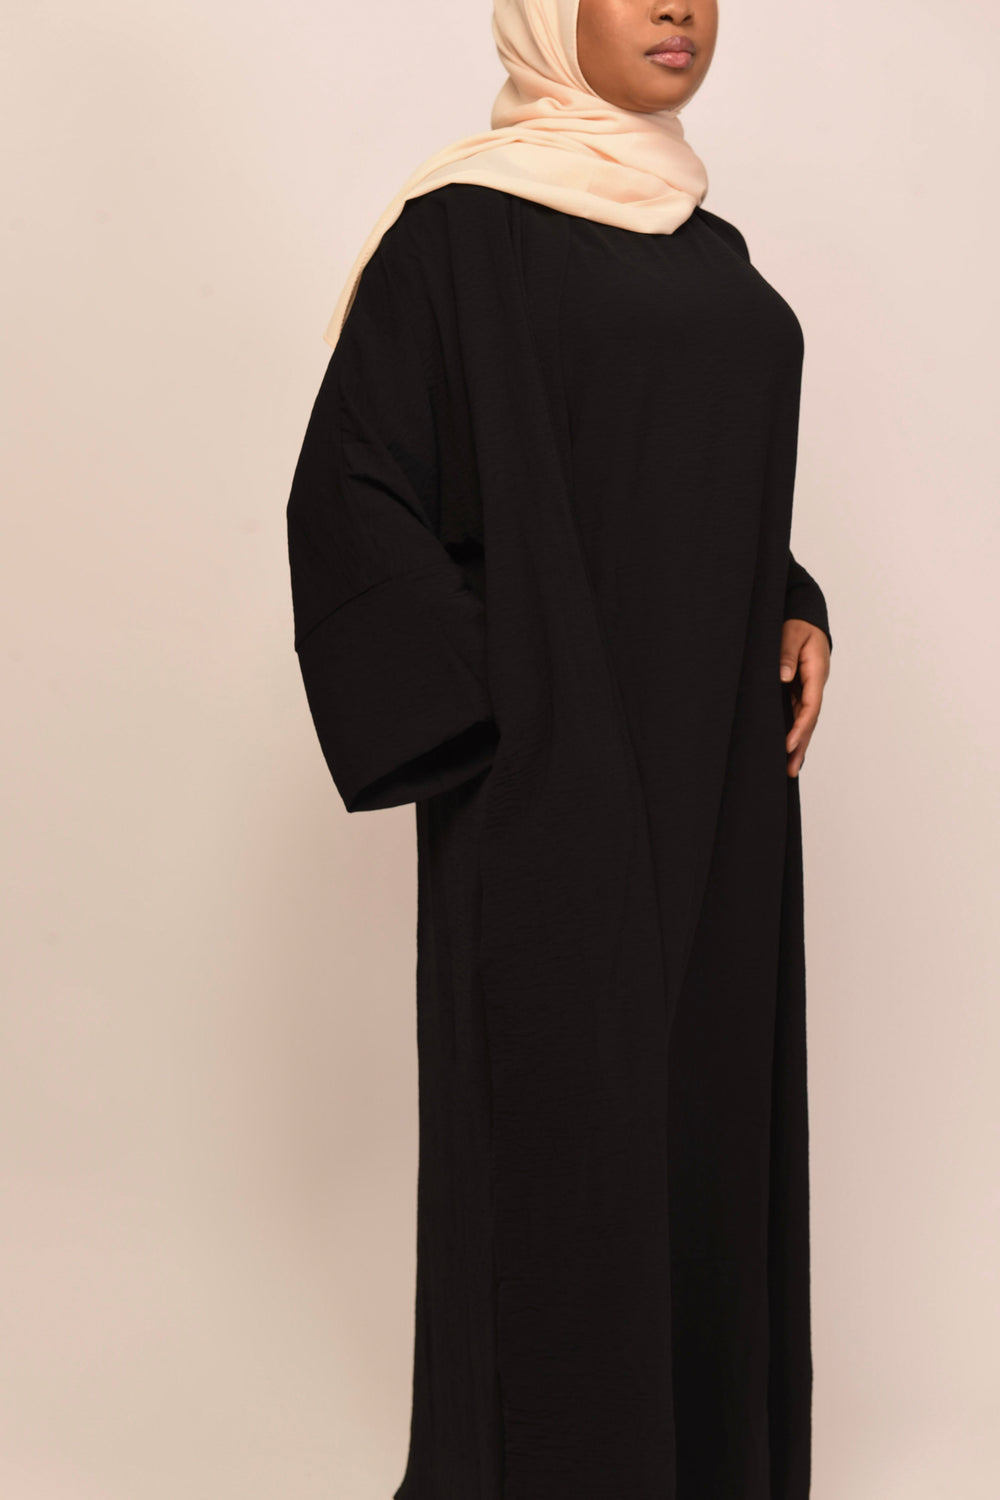 Get trendy with Lea 2-Piece Abaya Set - Black (As Is) -  available at Voilee NY. Grab yours for $54.90 today!